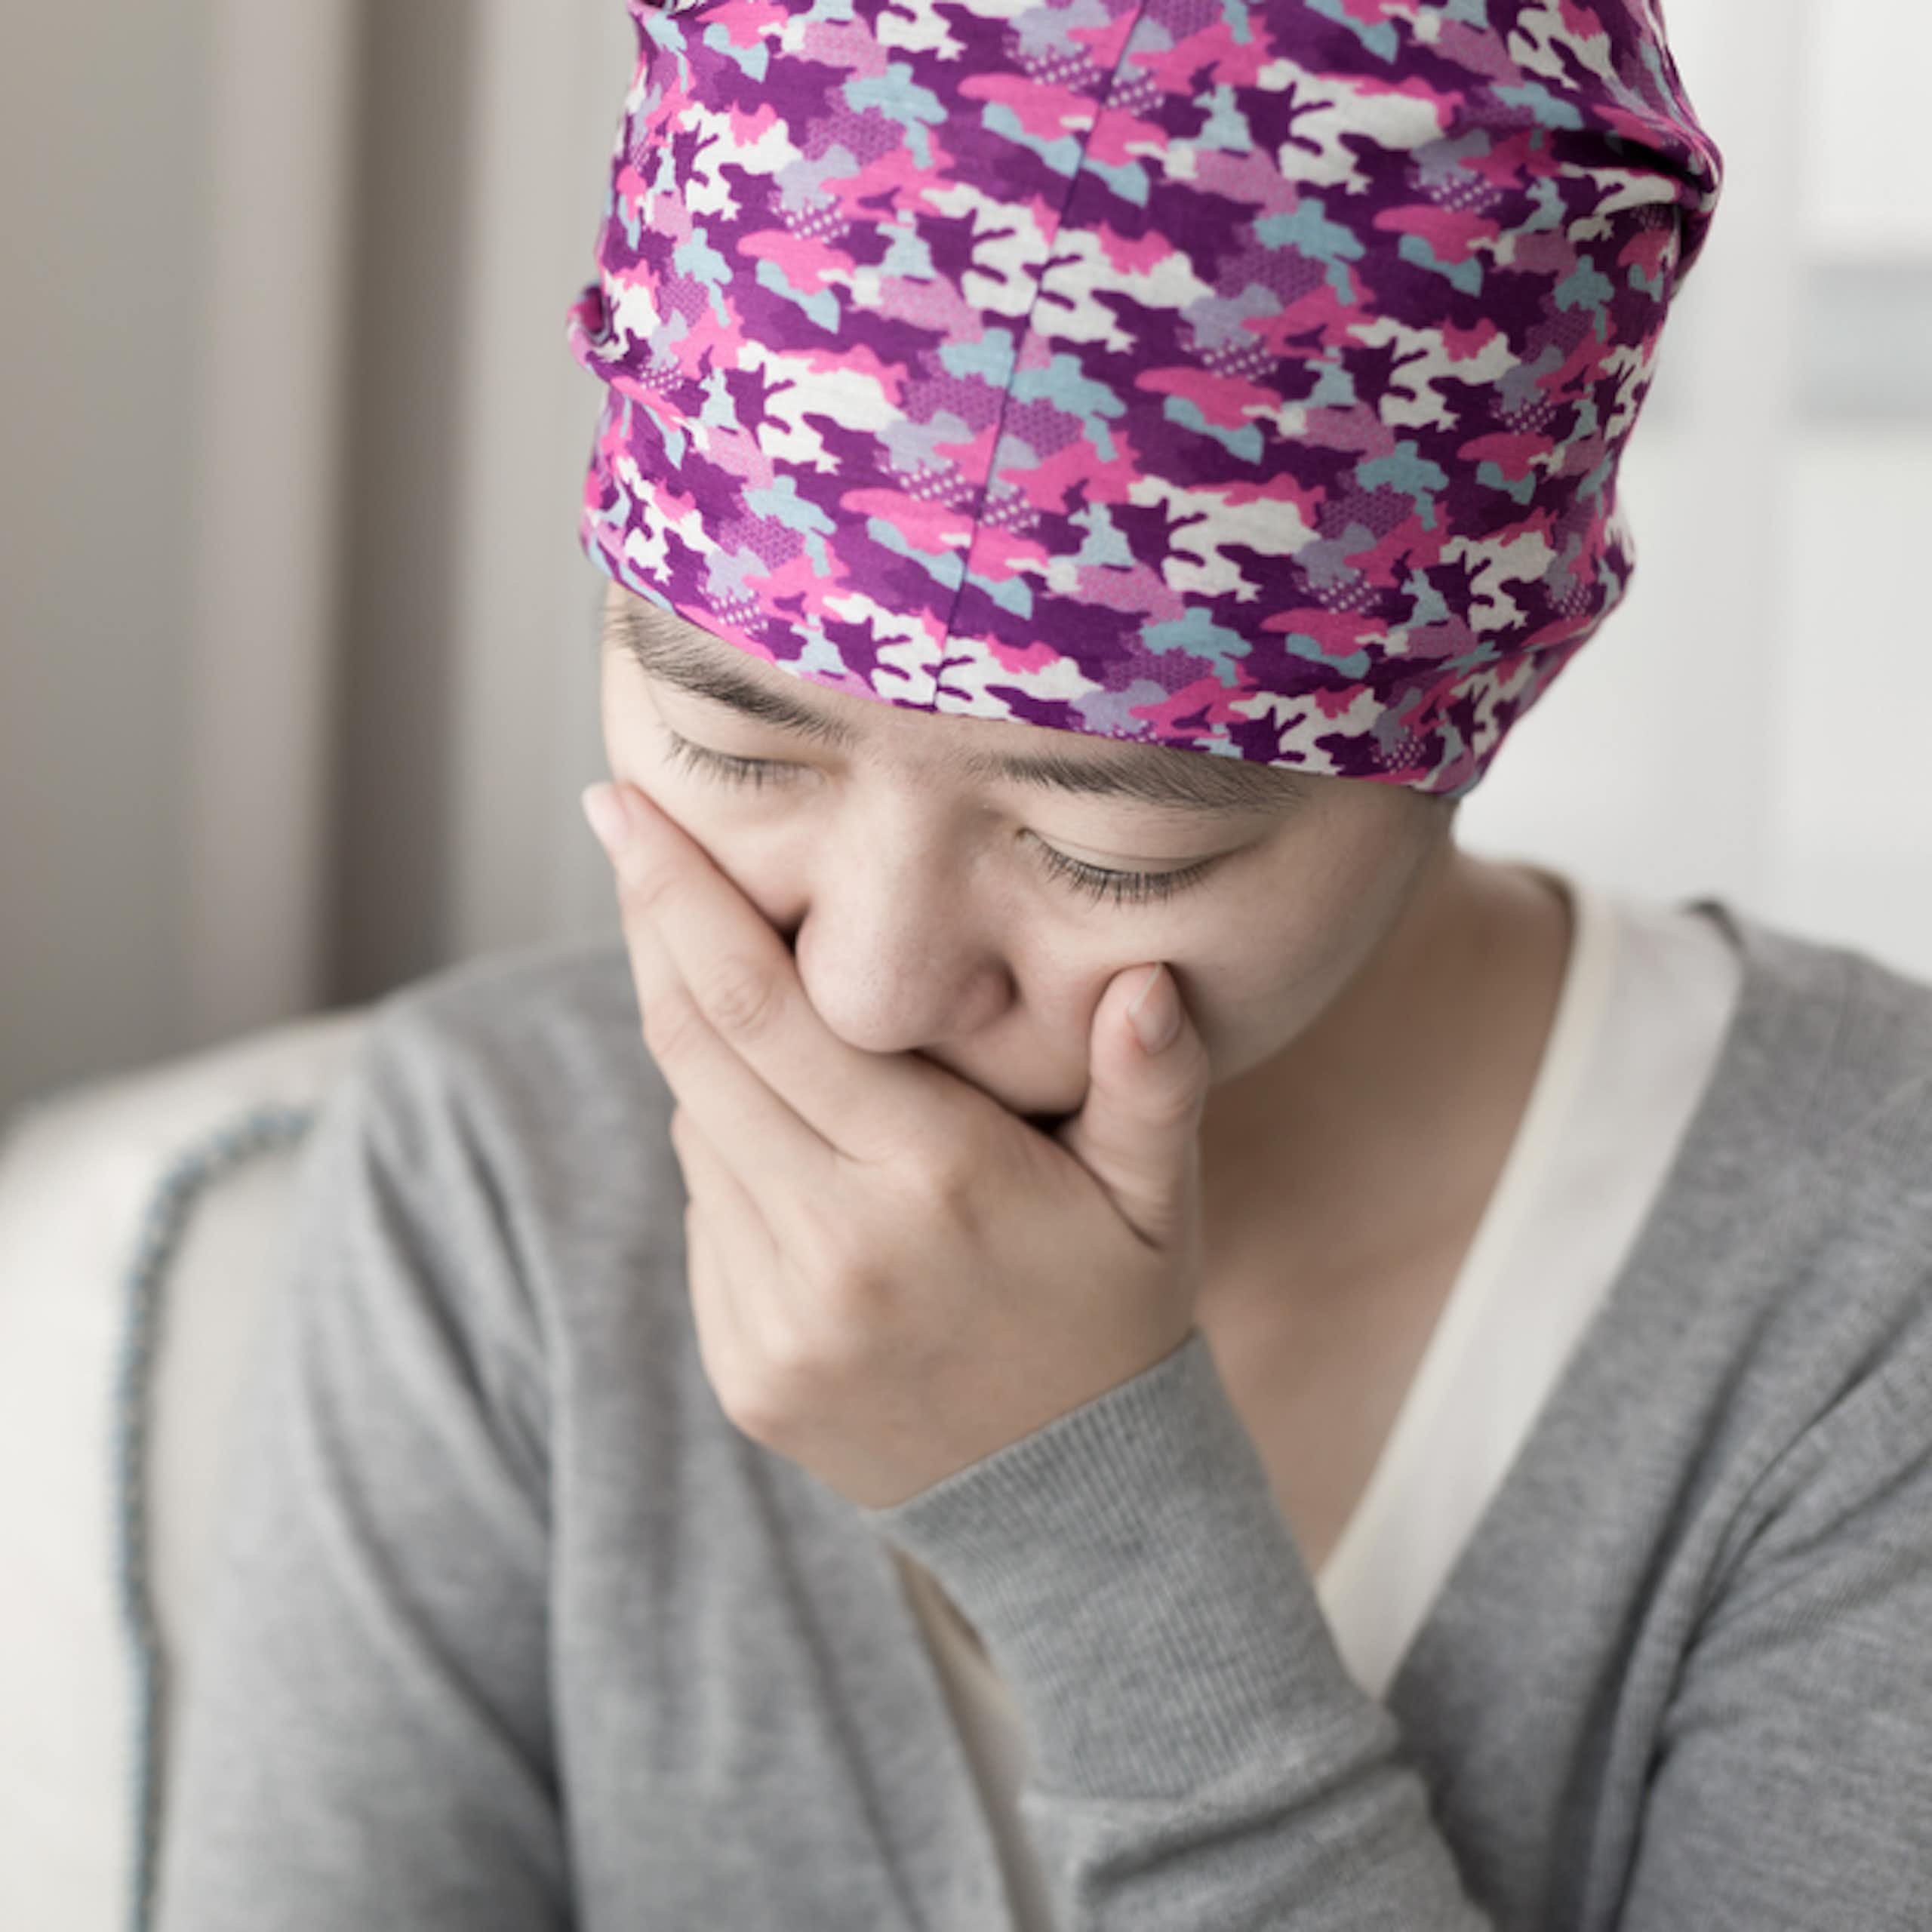 Woman with cancer wearing scarf/hat, hand over mouth